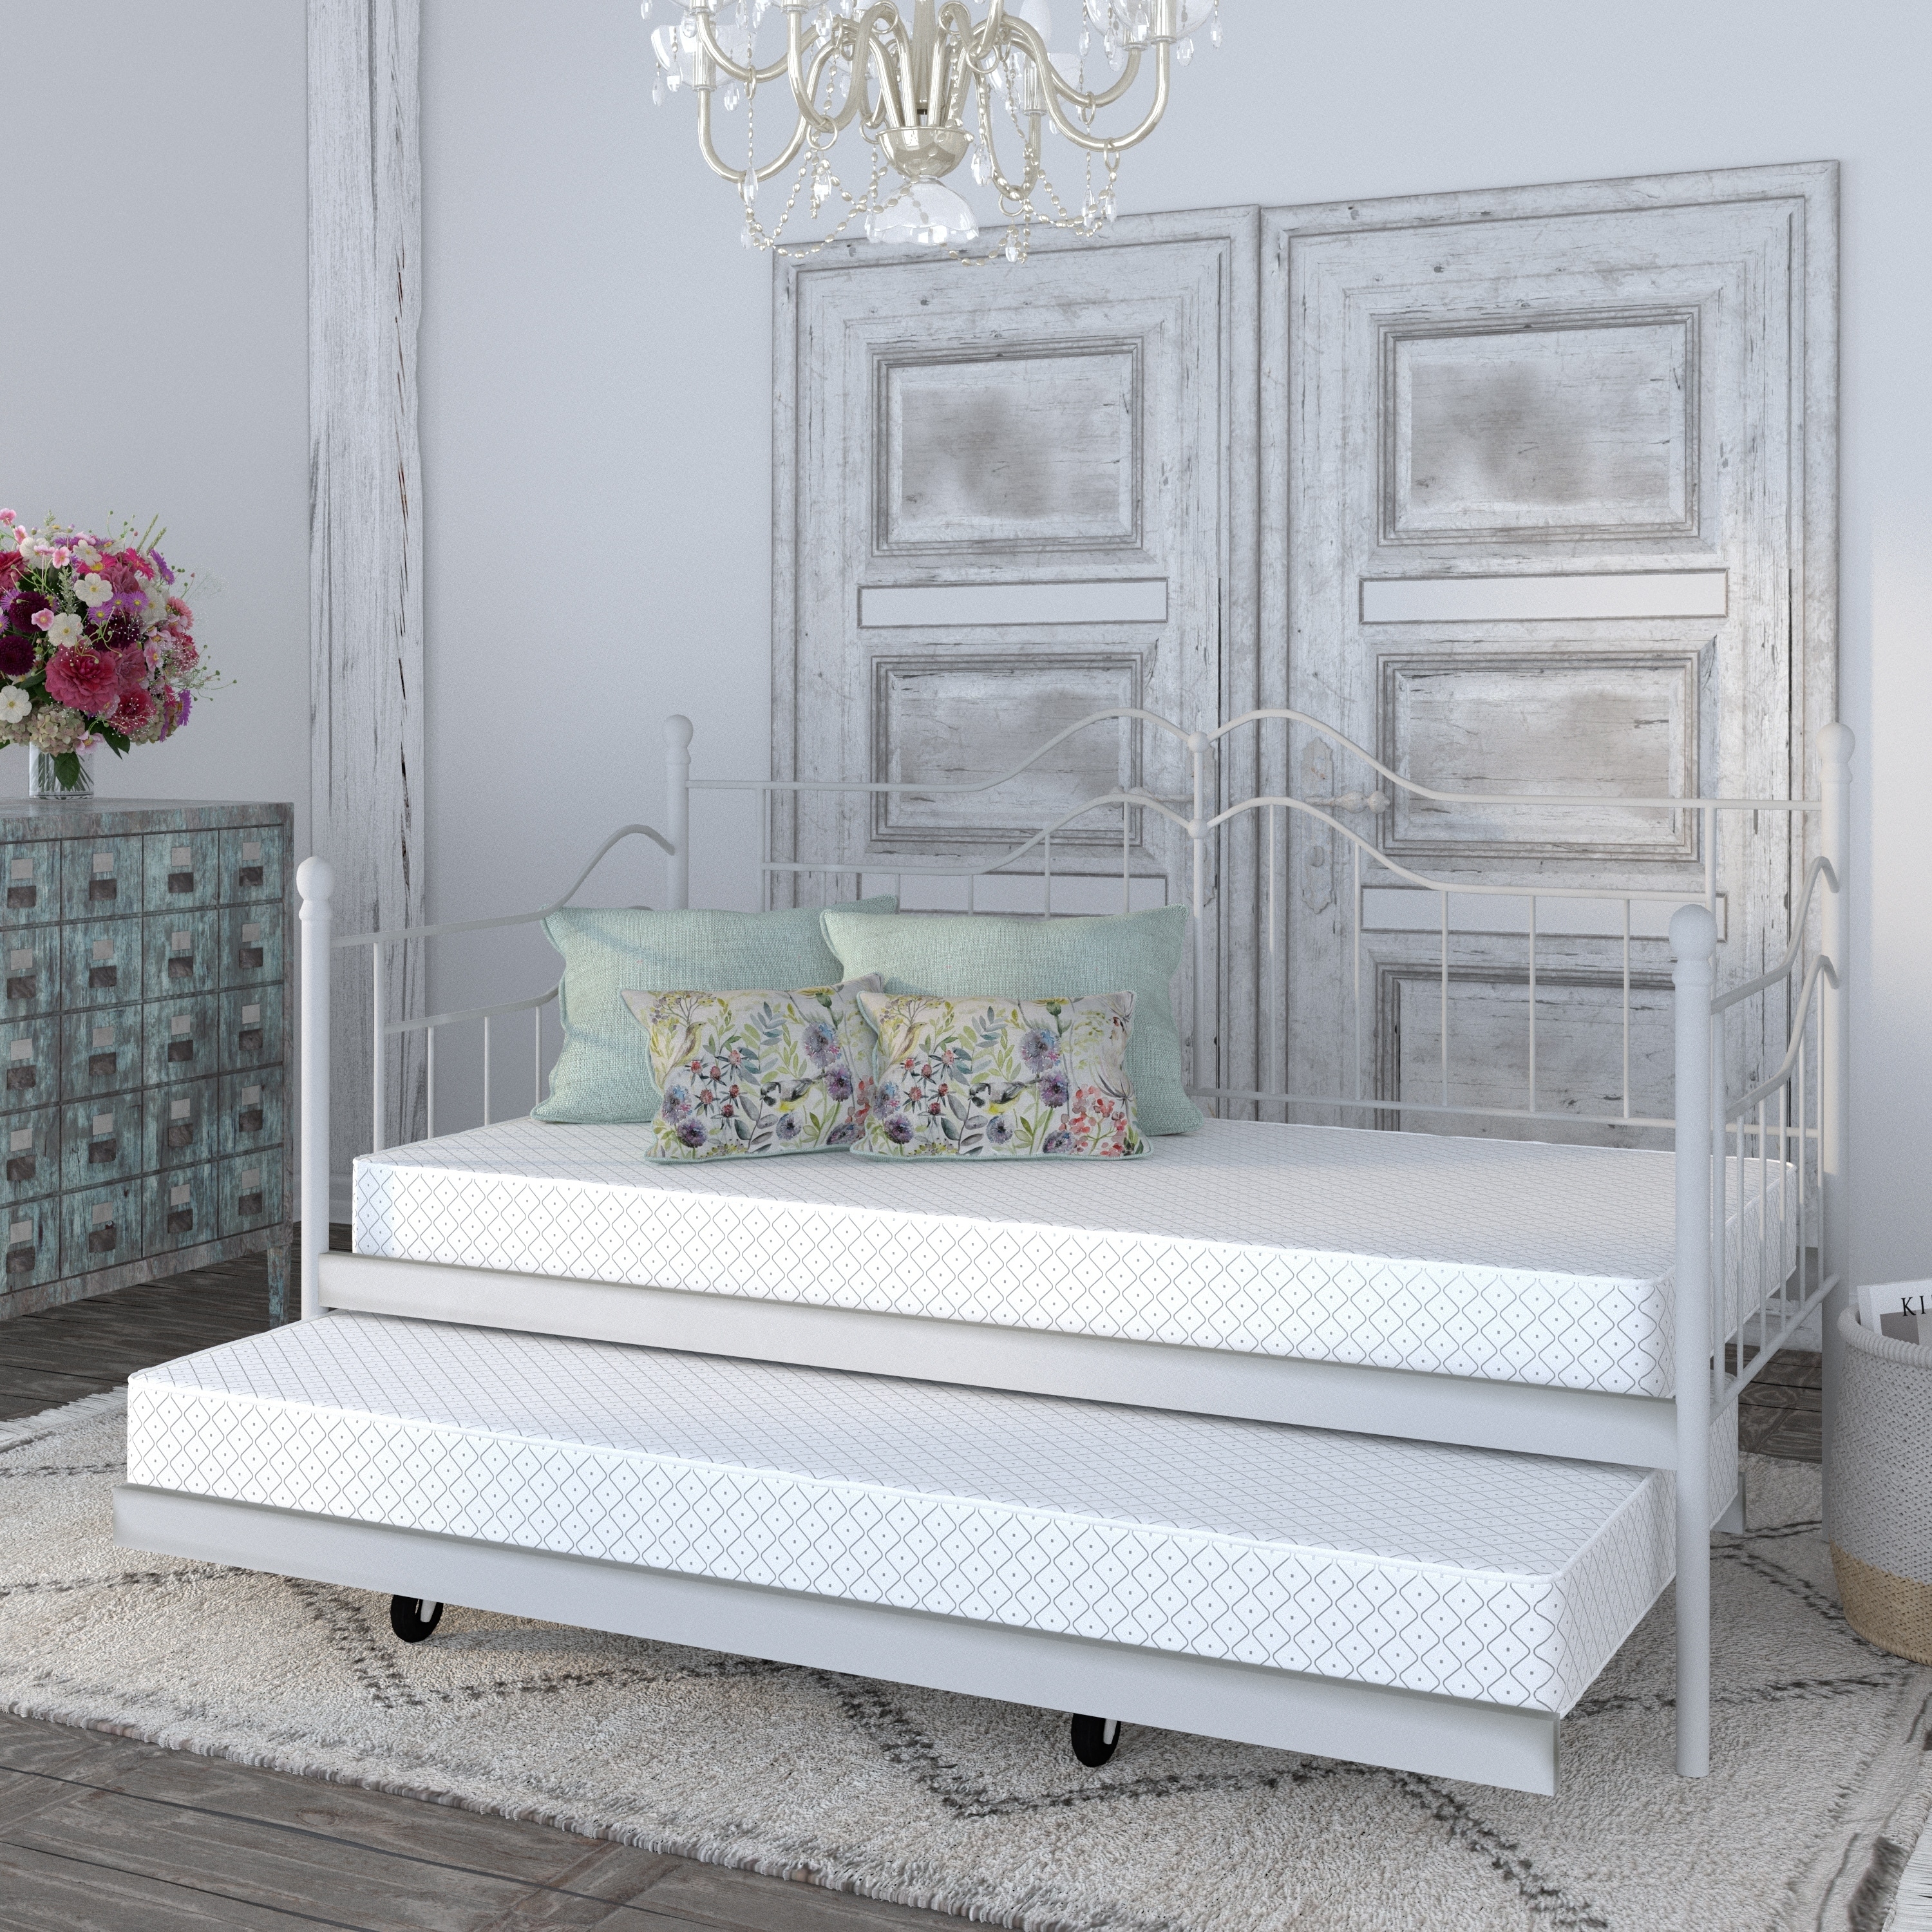 Details about   6 Inch Twin Polyester Filled Mattress w/ Jacquard Cover Bunk Bed Daybed Trundle 